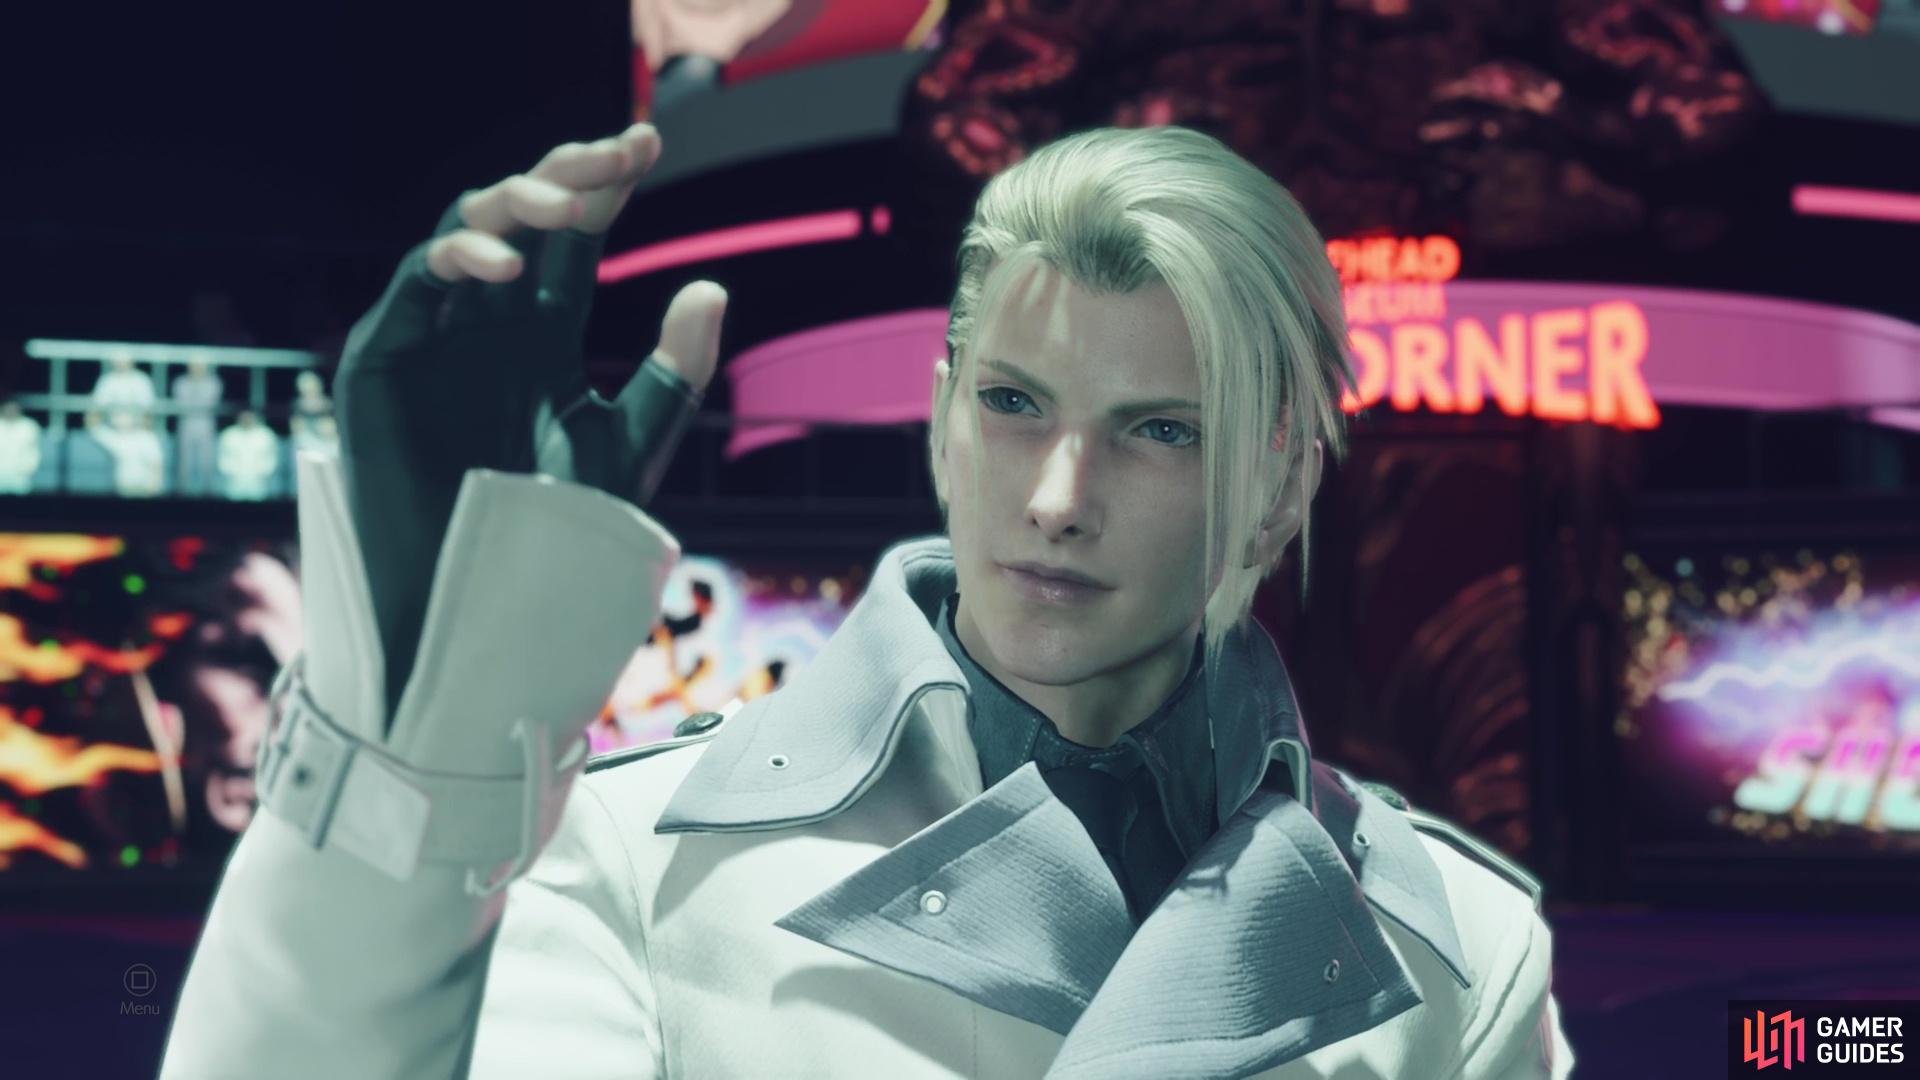 President Shinra appears after you defeat Elena and Rude, challenging Cloud to a one-on-one battle.